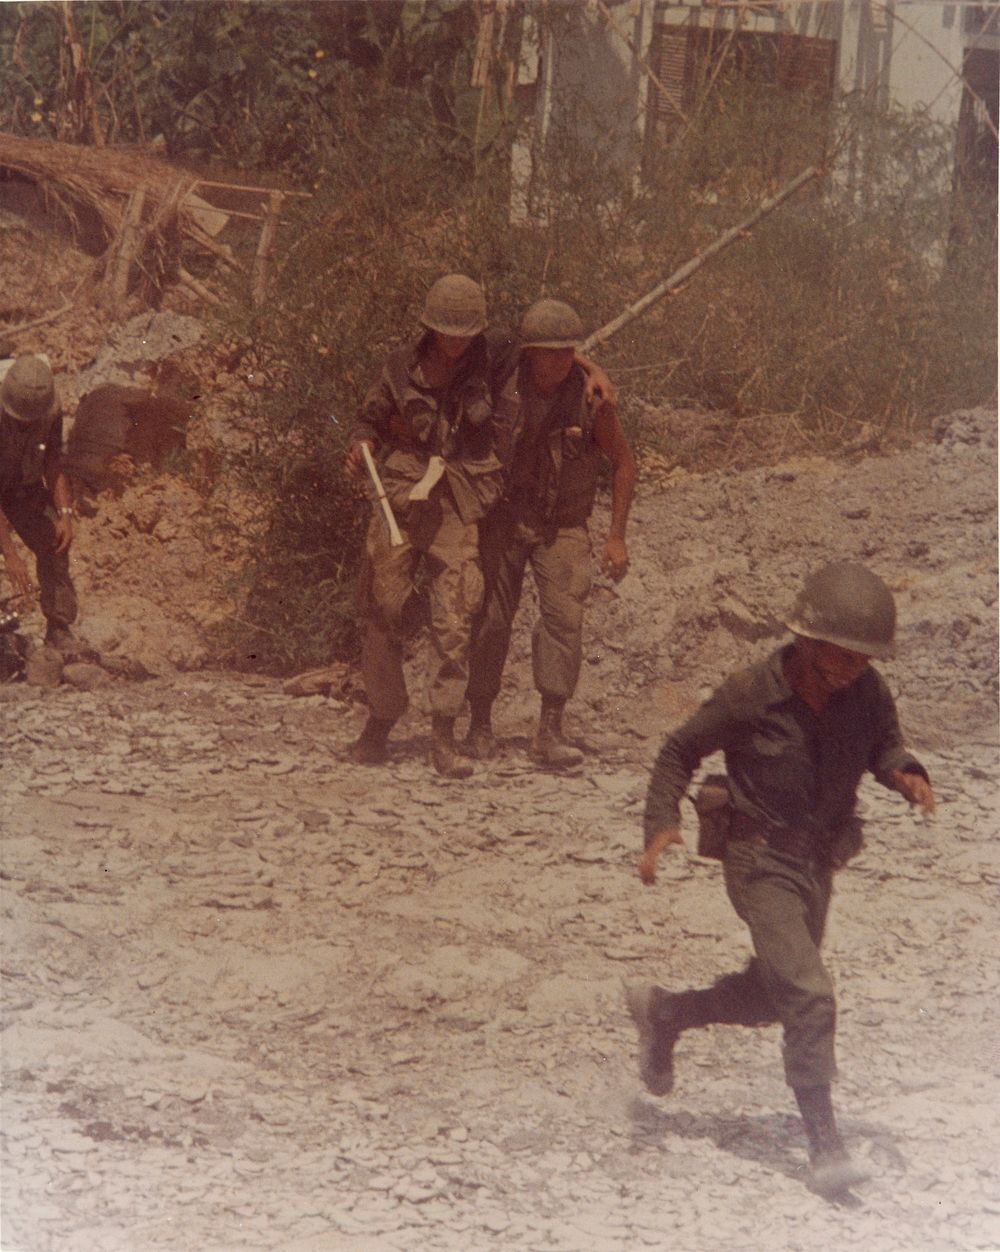 South Vietnam - Help begins at the scene of the fighting.